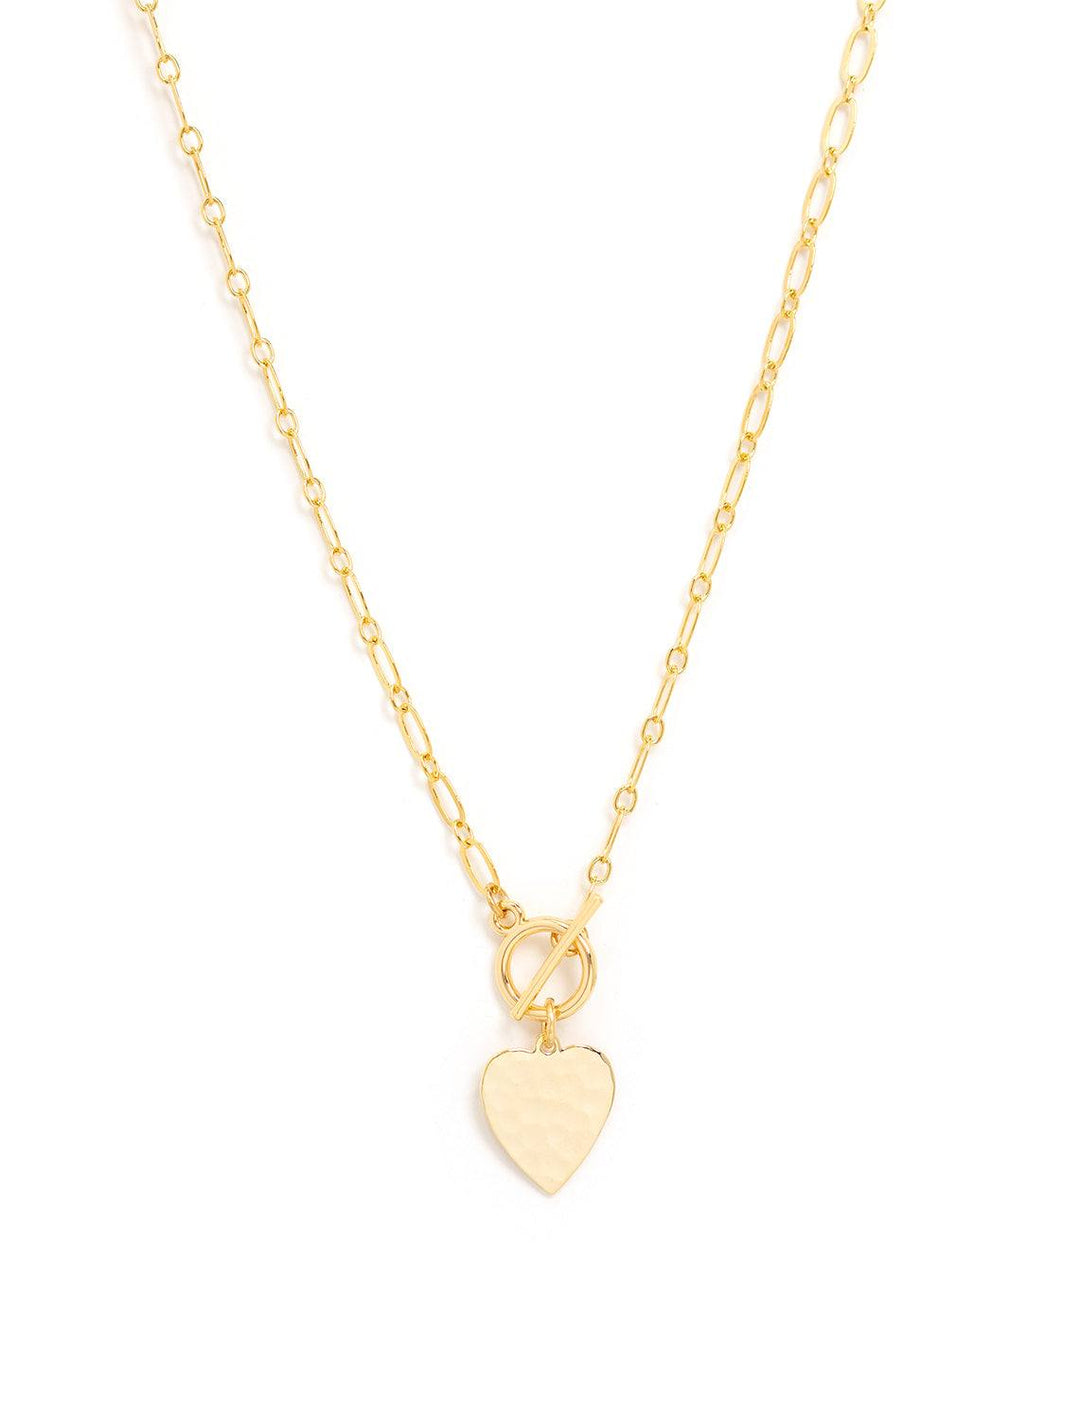 AV Max's heart and toggle necklace.